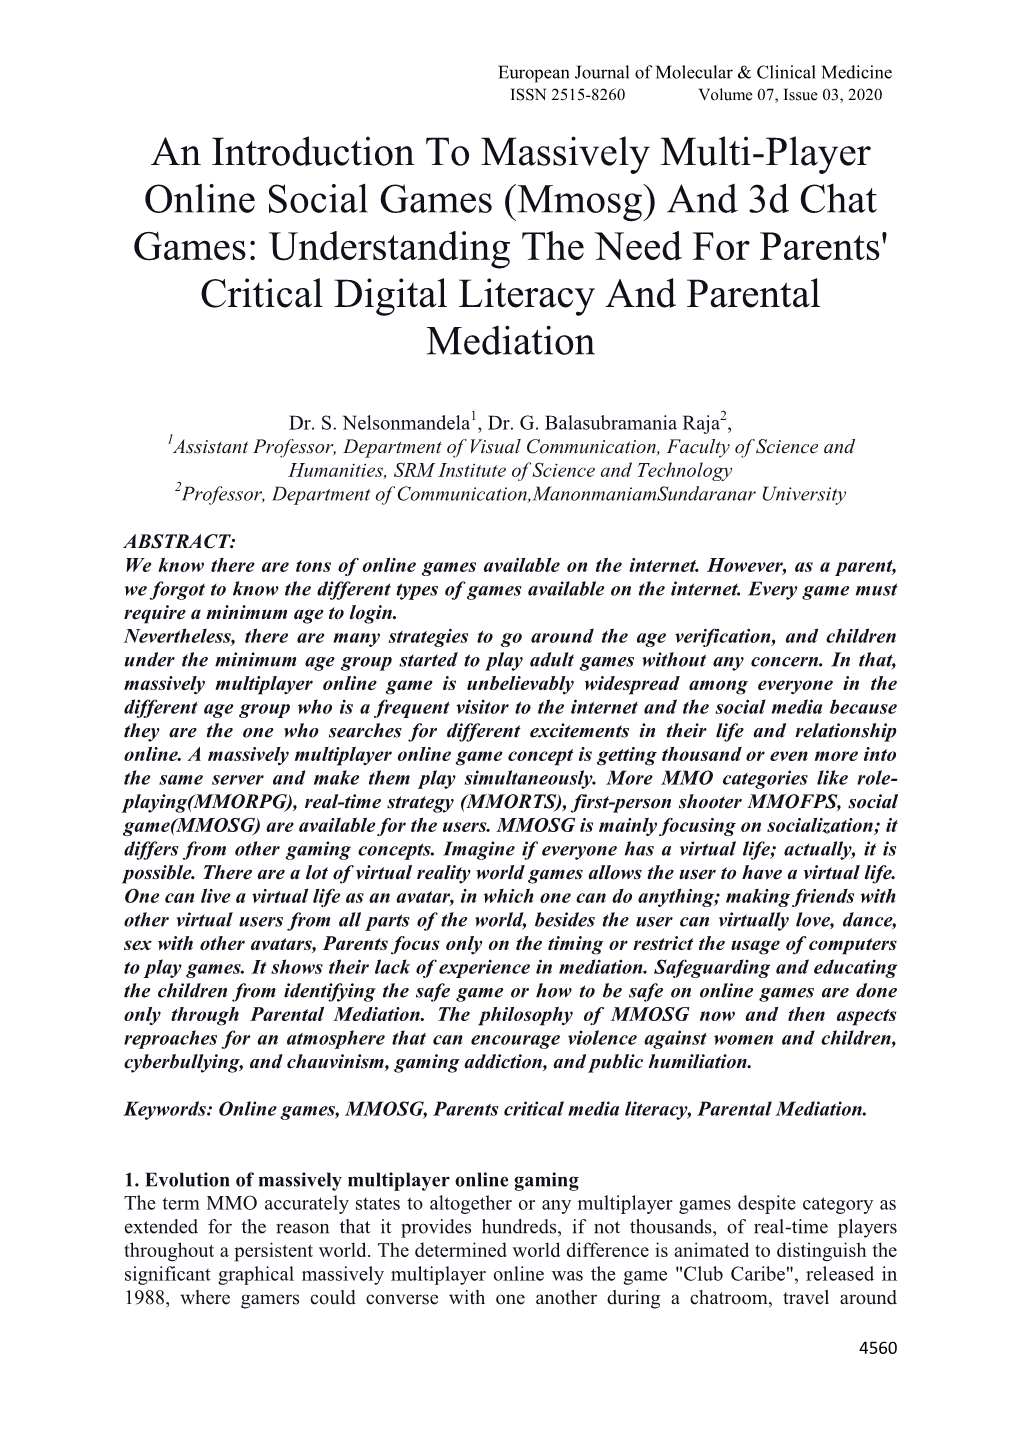 Mmosg) and 3D Chat Games: Understanding the Need for Parents' Critical Digital Literacy and Parental Mediation